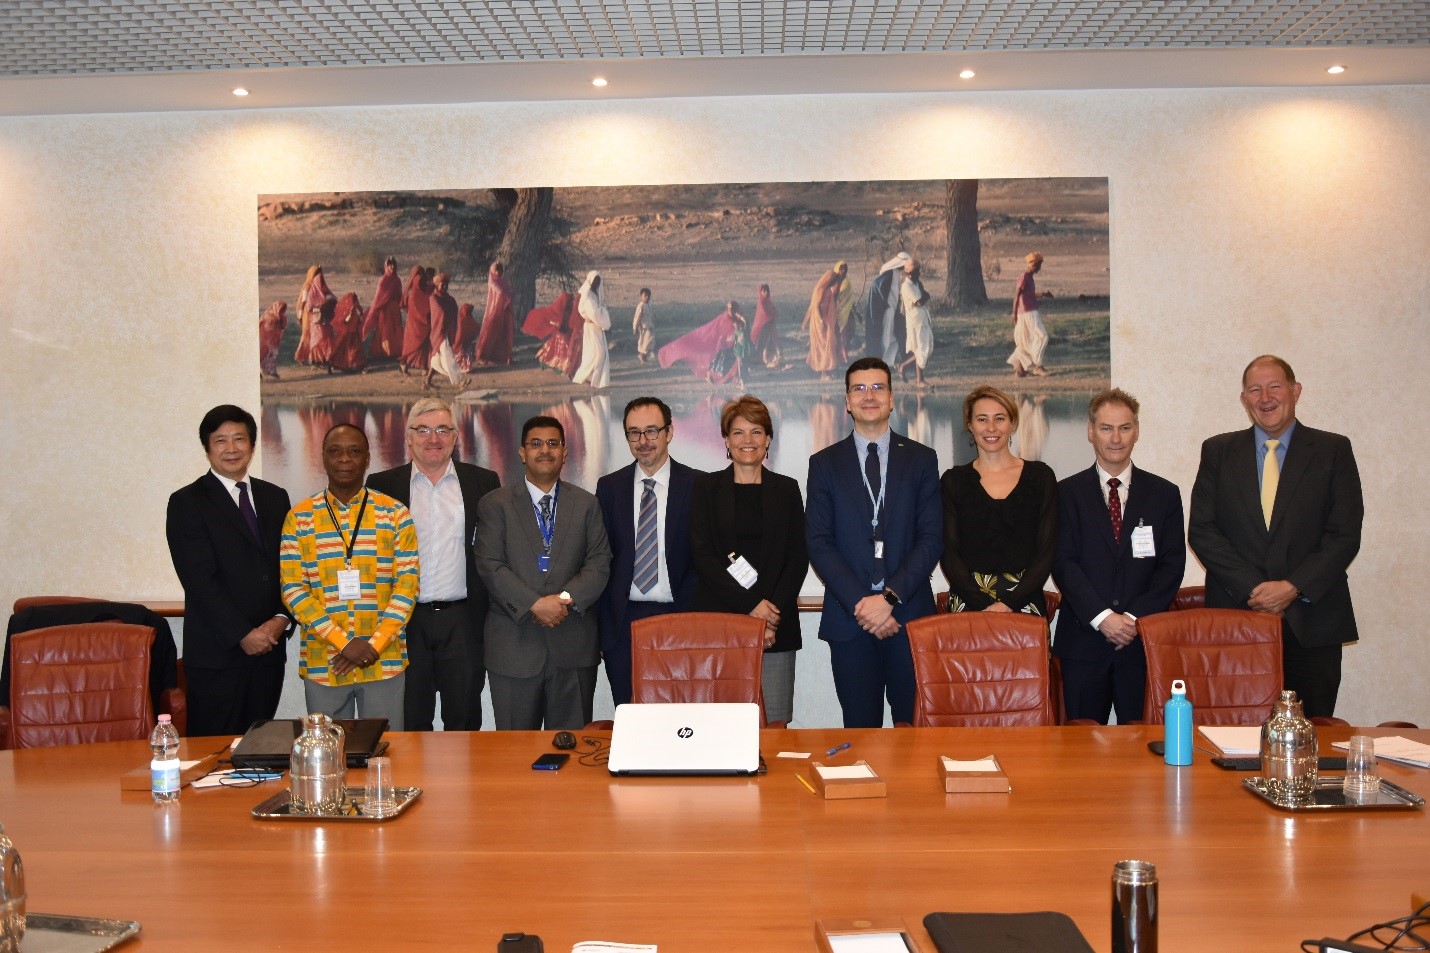 The IPPC Financial Committee Meeting in October Held in Rome Italy ...